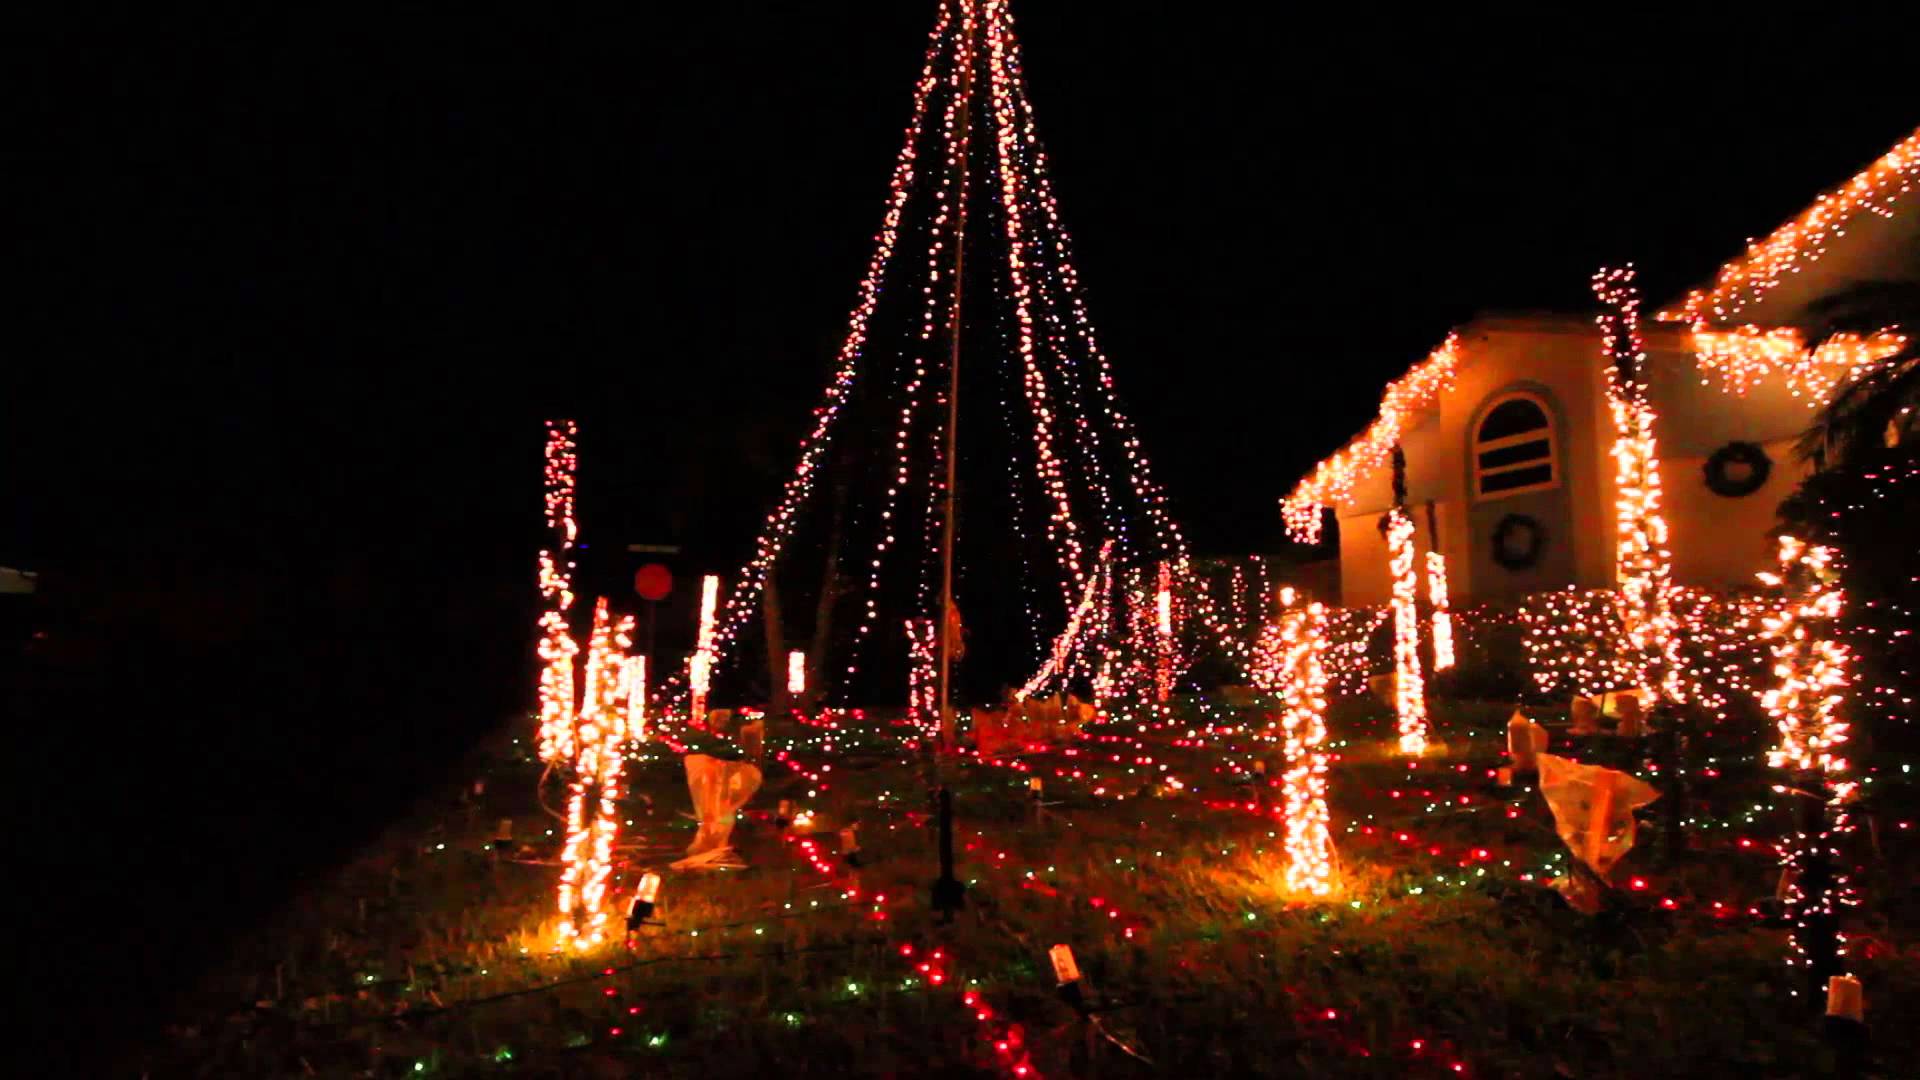 The Most Synchronized Christmas Light Show